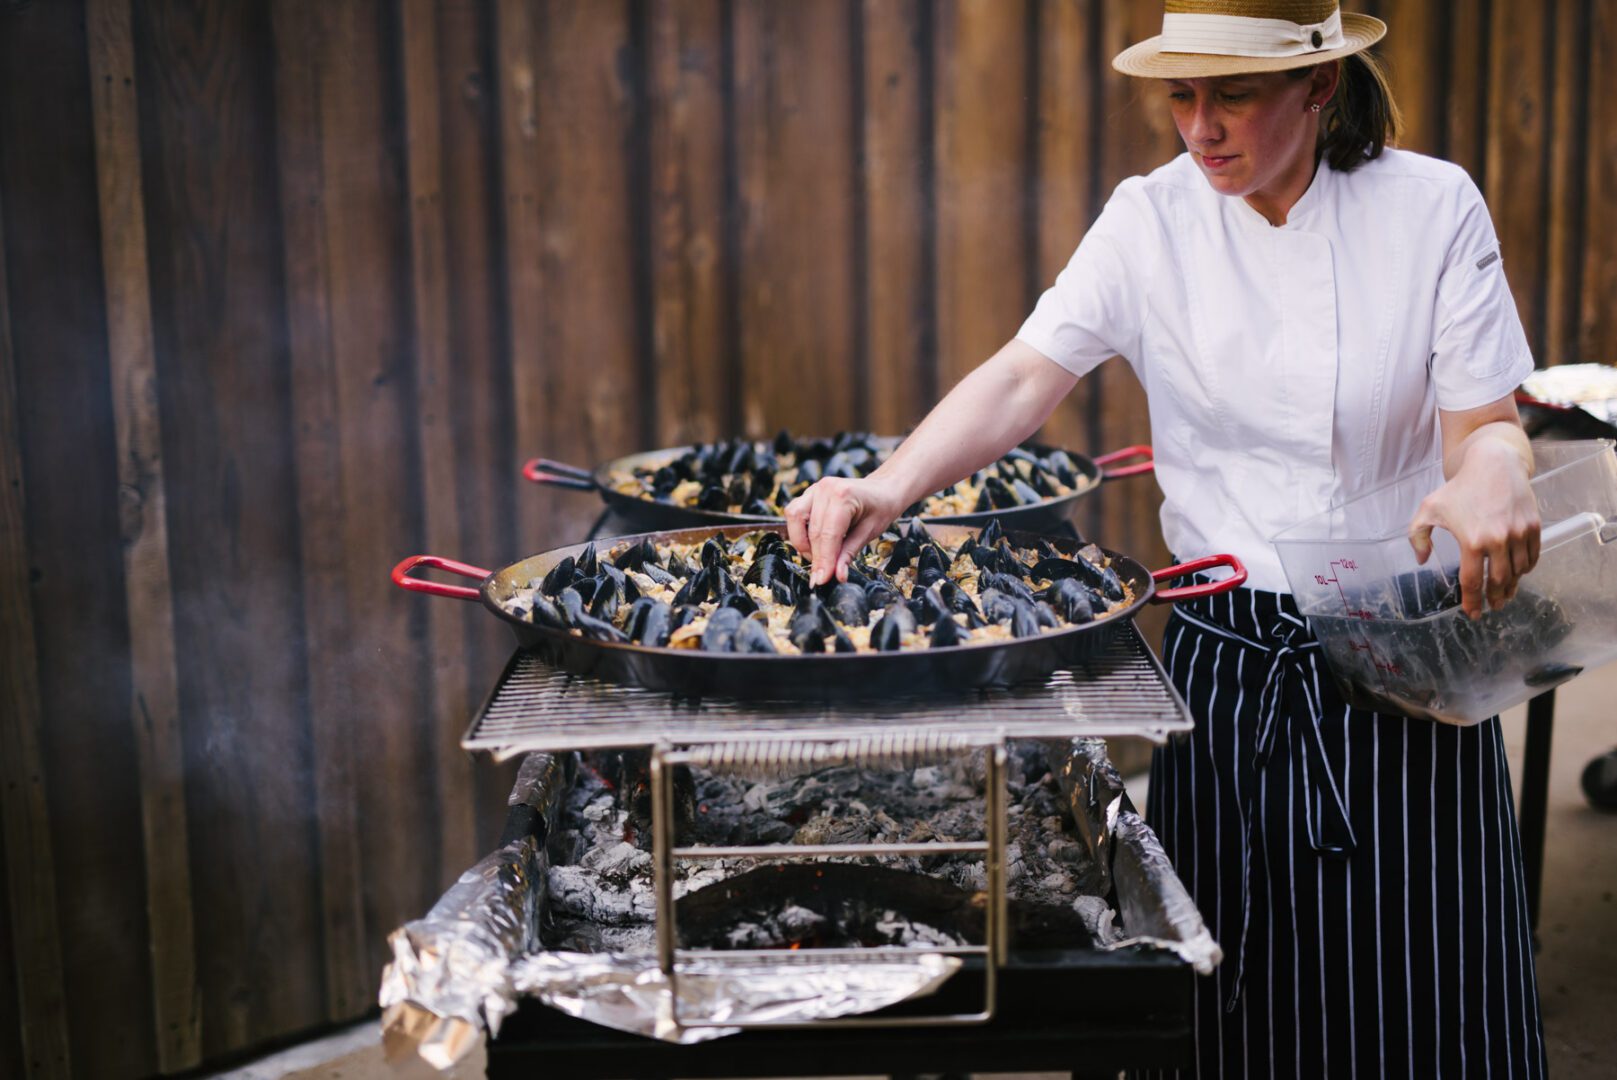 A woman is preparing mussels on a grill.